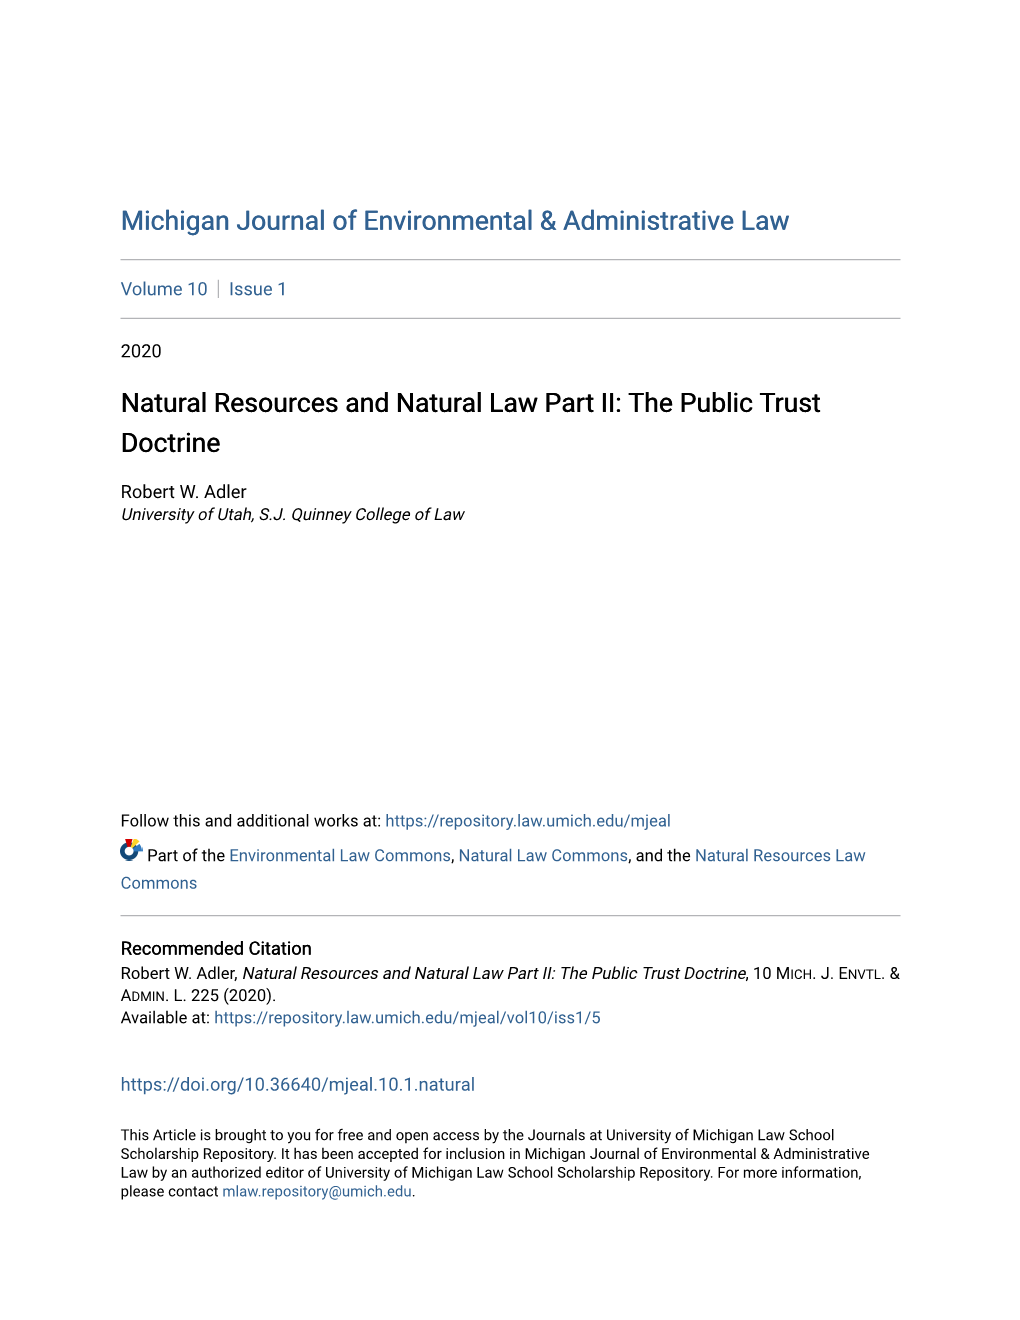 Natural Resources and Natural Law Part II: the Public Trust Doctrine